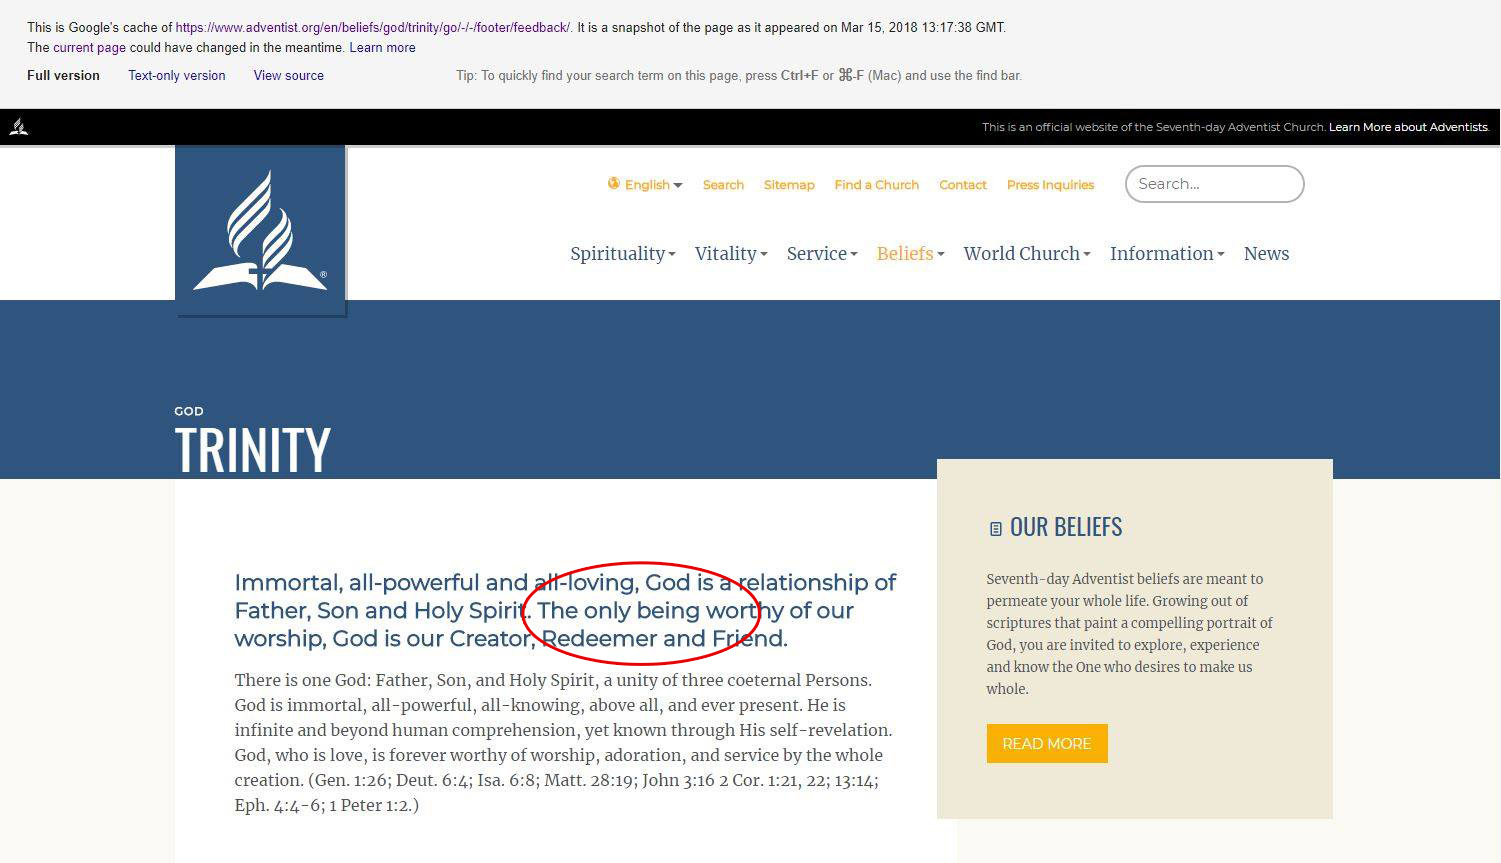 The phrase “The only being worthy of our worship” appeared on the SDA’s official website until March of 2018.